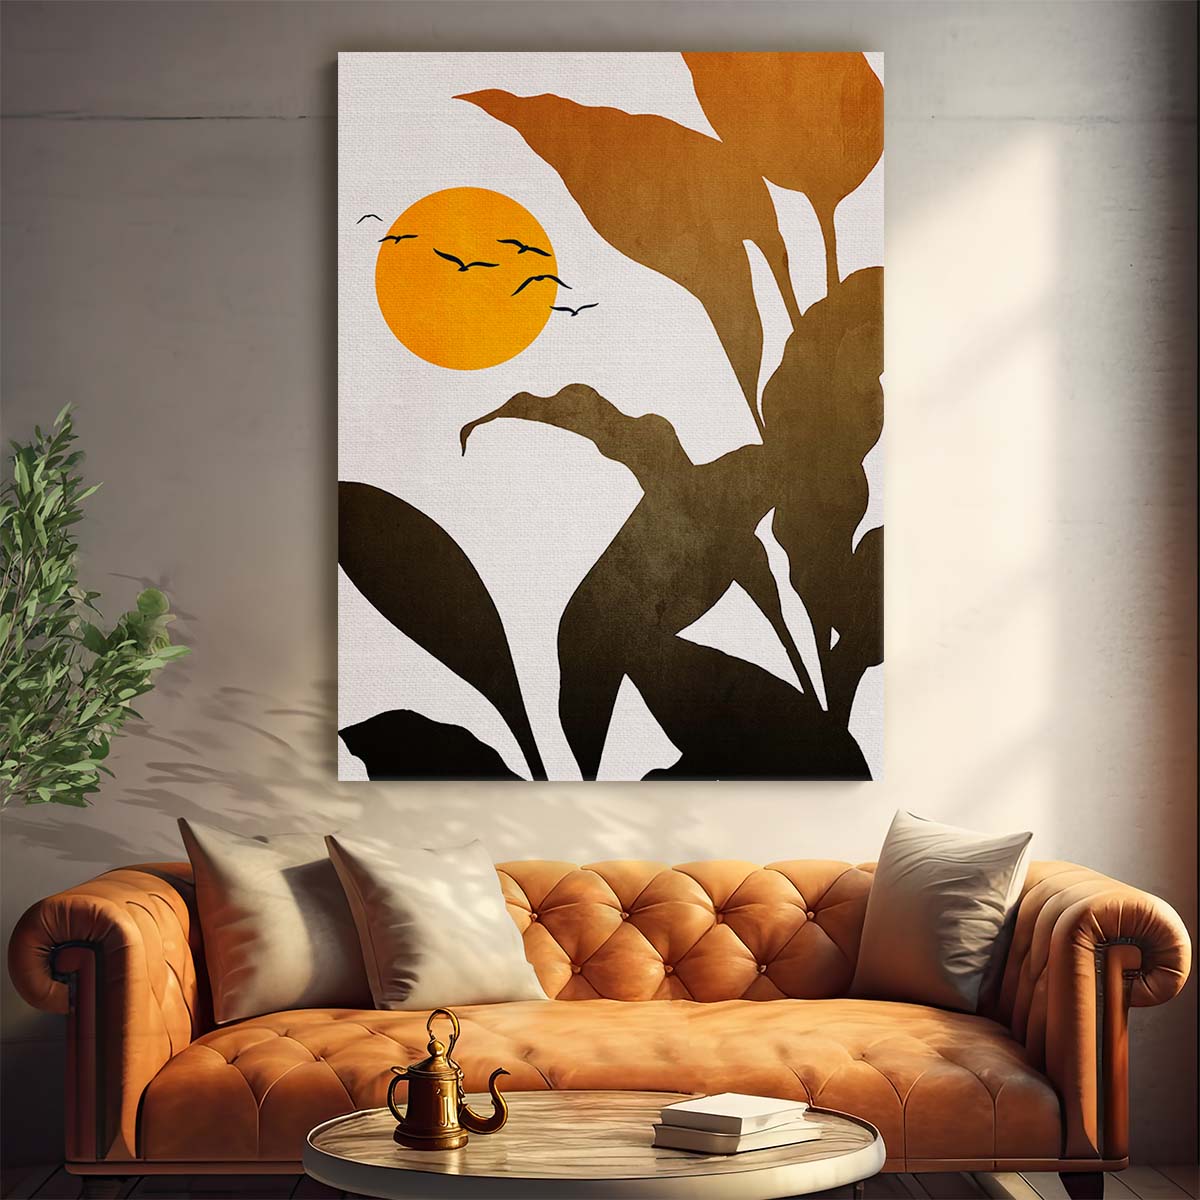 Golden Sunset Tropical Birds & Leaves Botanical Illustration Art by Luxuriance Designs, made in USA